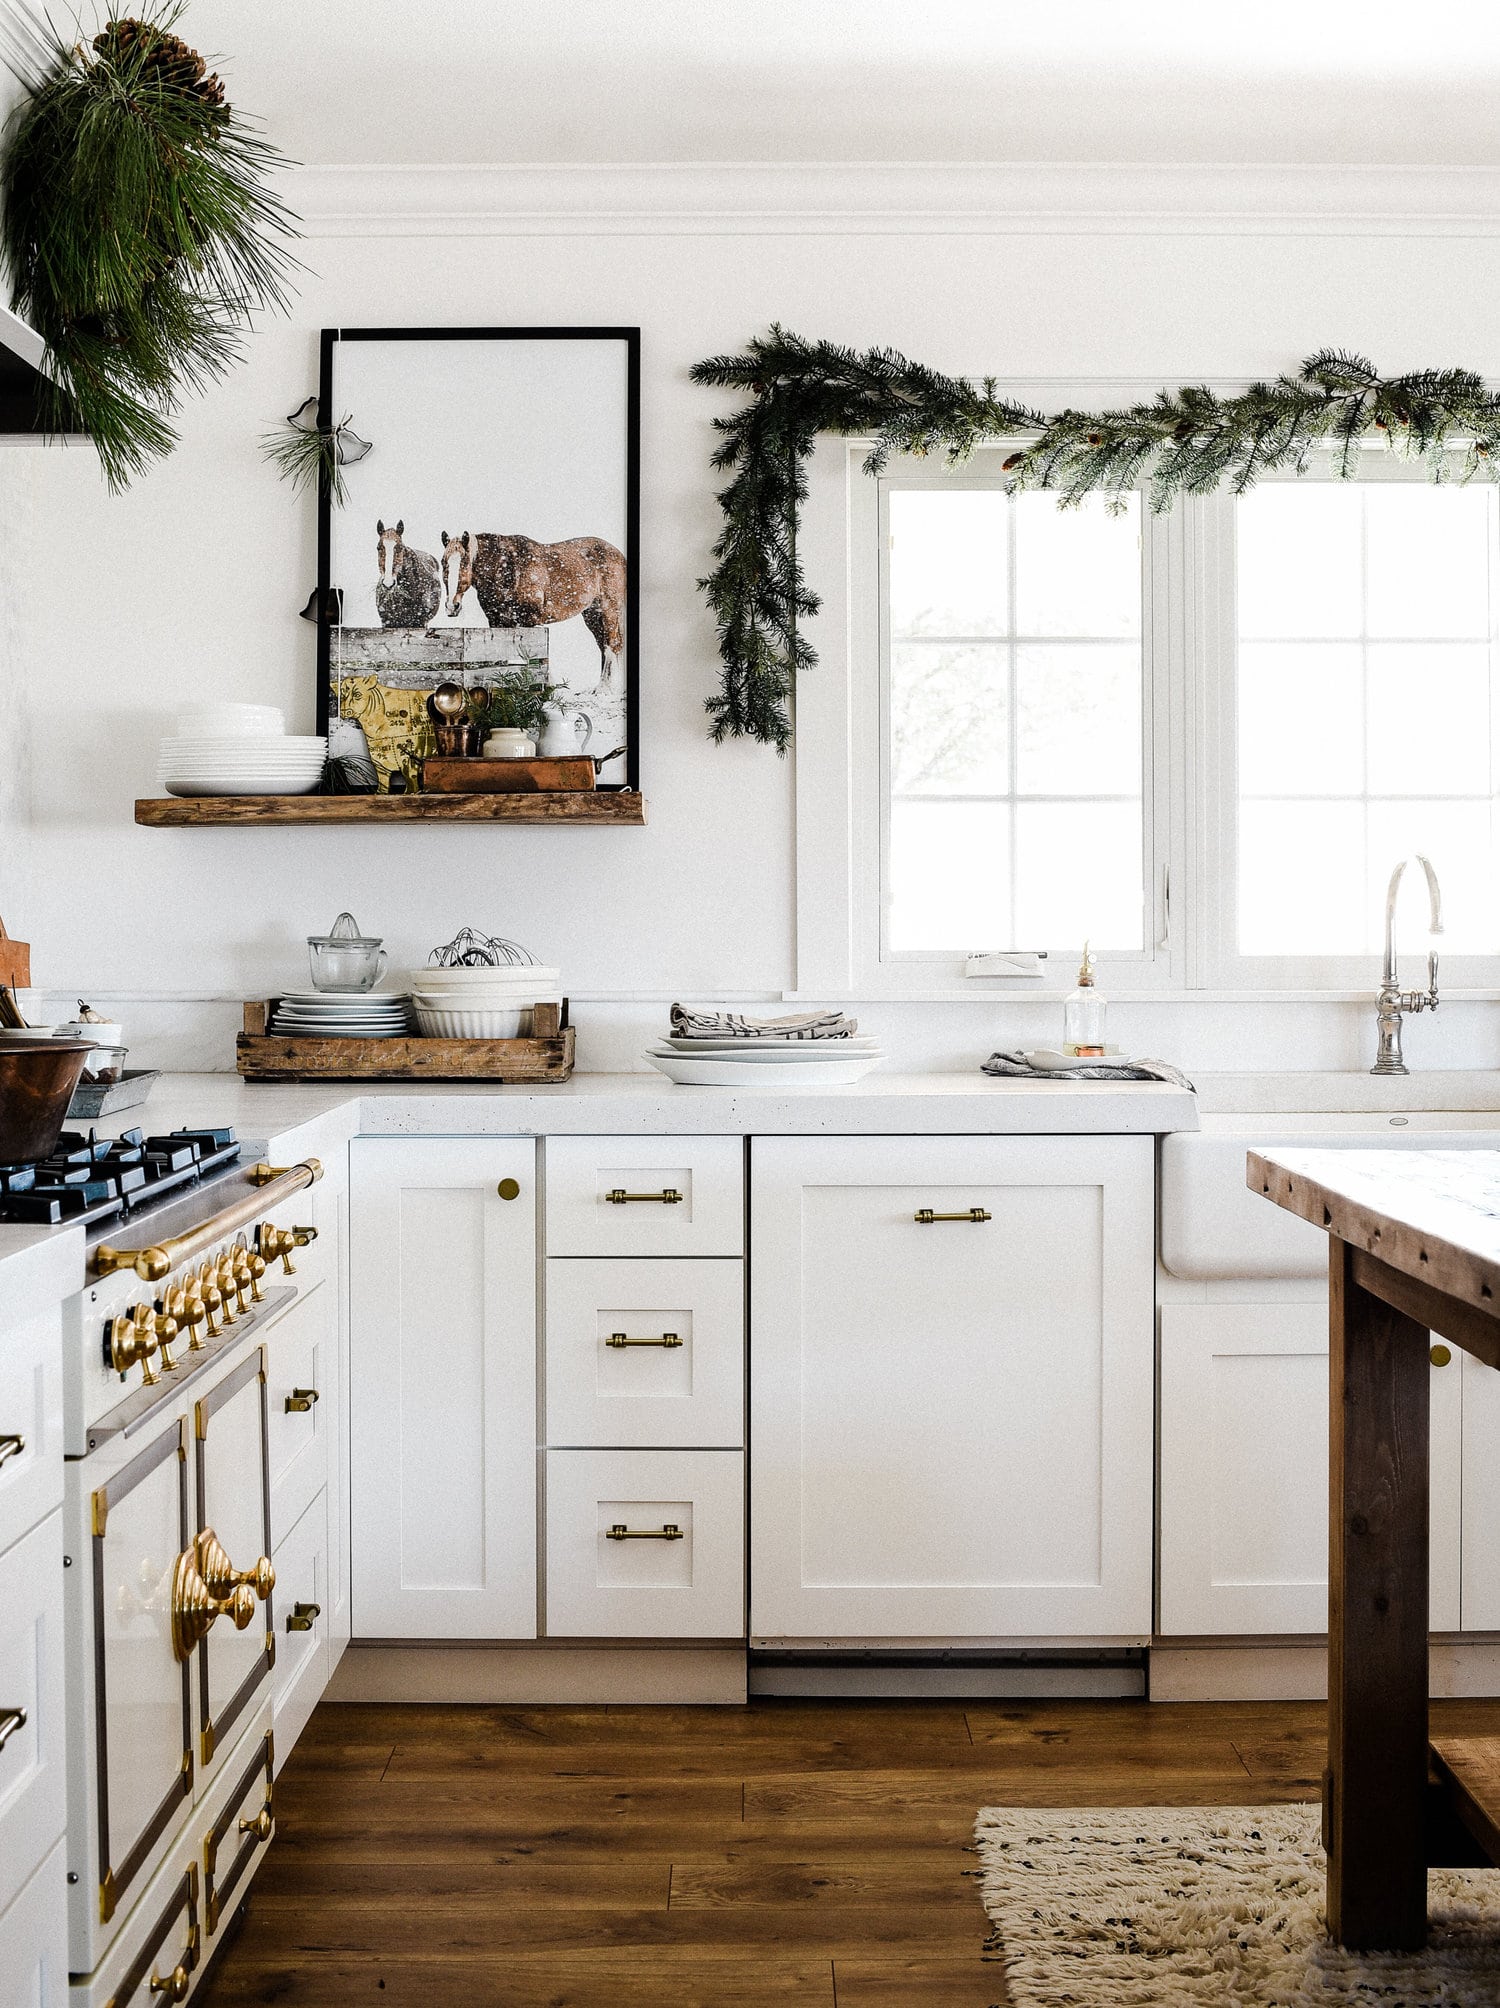 farmhouse kitchen decorated for the holidays with greenery garland | our favorite holiday home decor ideas on coco kelley